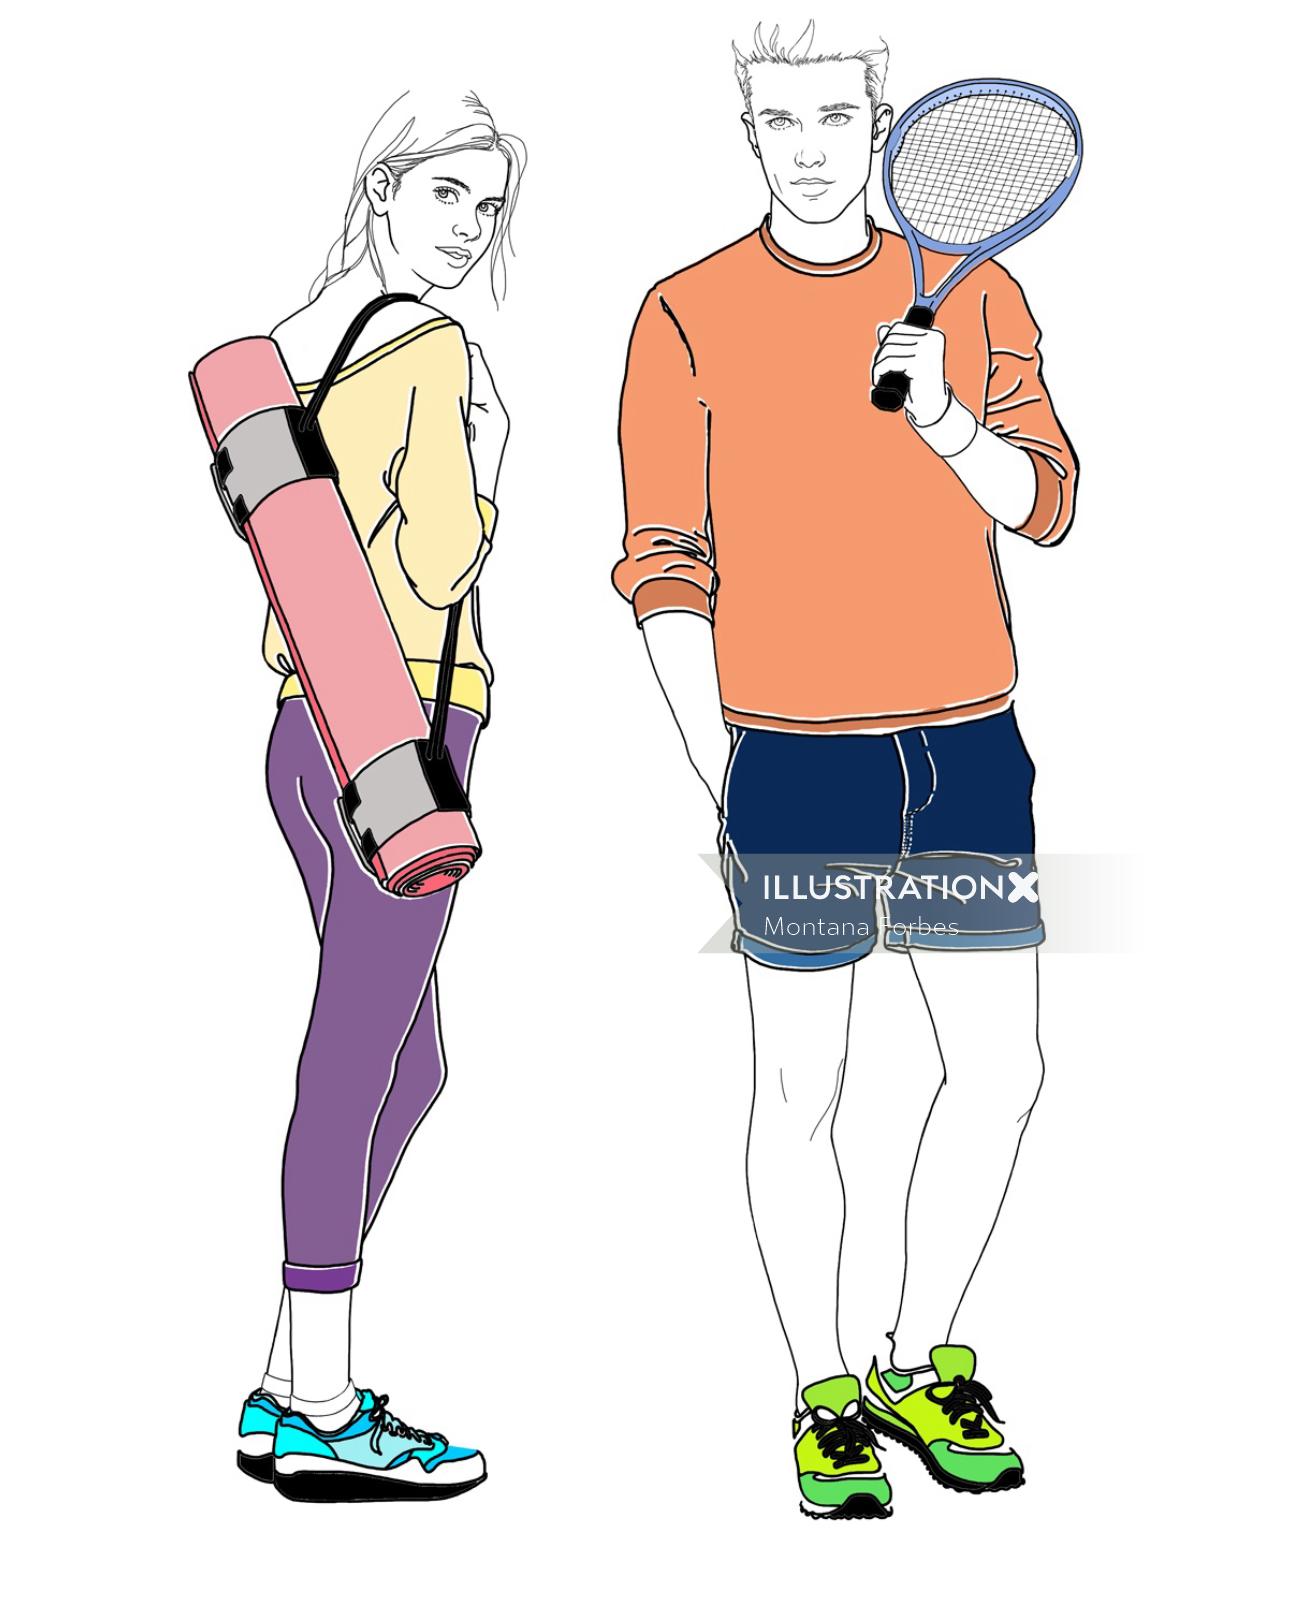 Illustration for Harrods sports wear by Montana Forbes